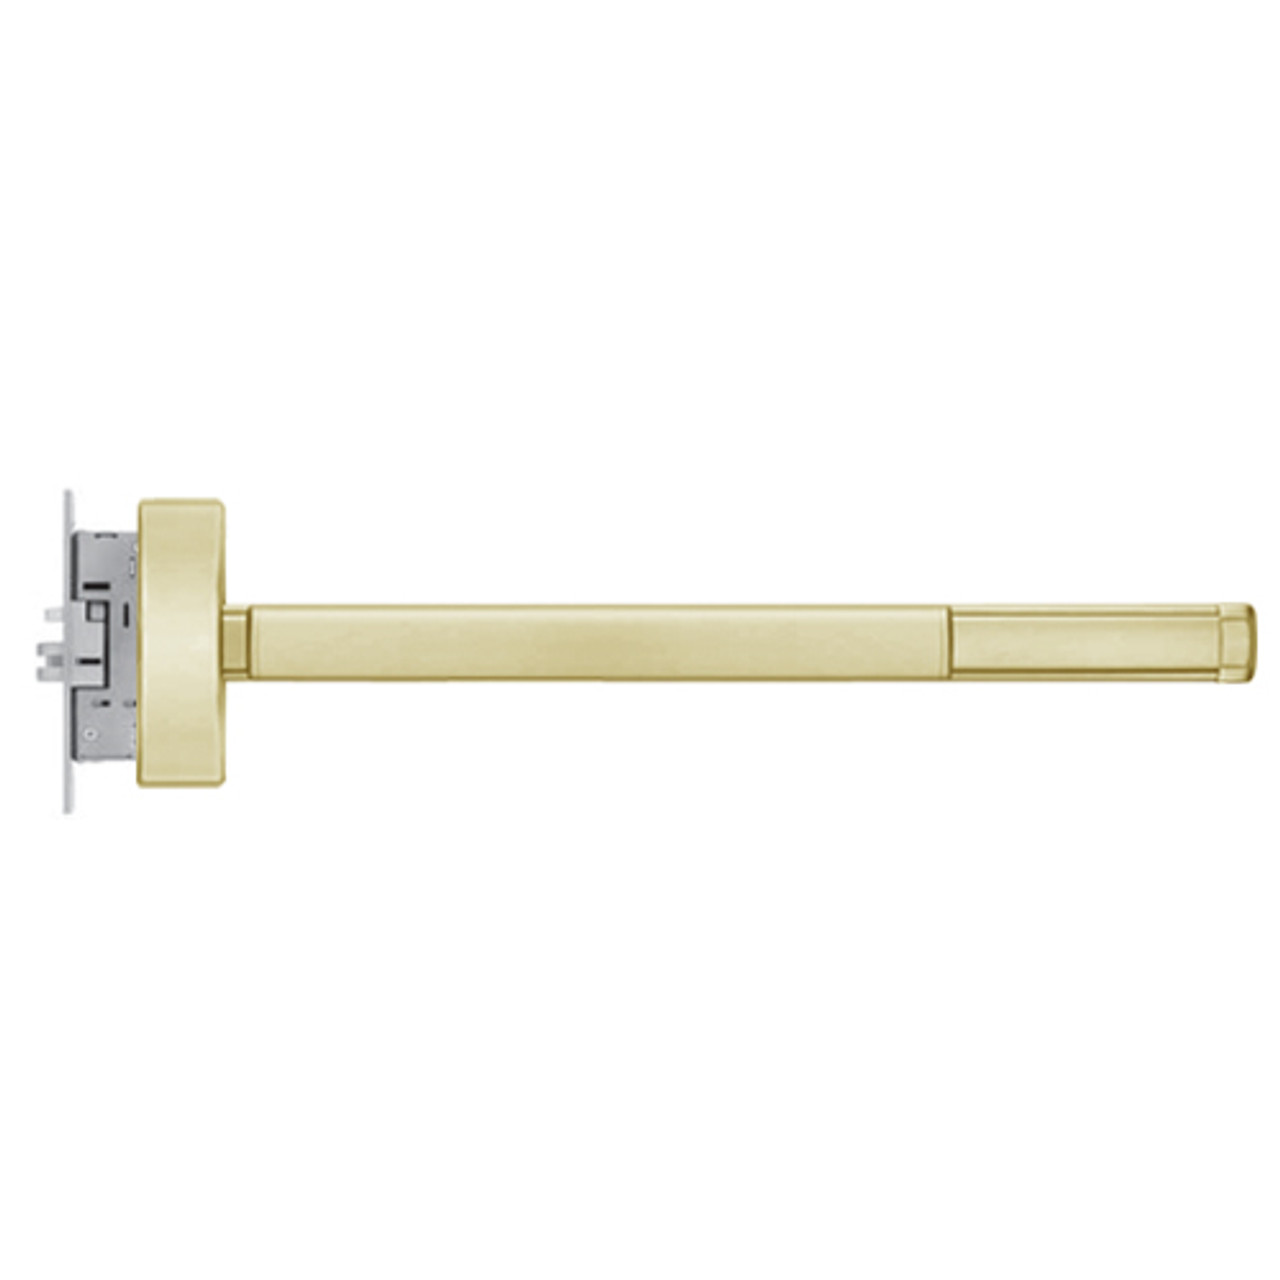 DEFL2302-RHR-606-36 PHI 2300 Series Fire Rated Apex Mortise Exit Device with Delayed Egress Prepped for Dummy Trim in Satin Brass Finish